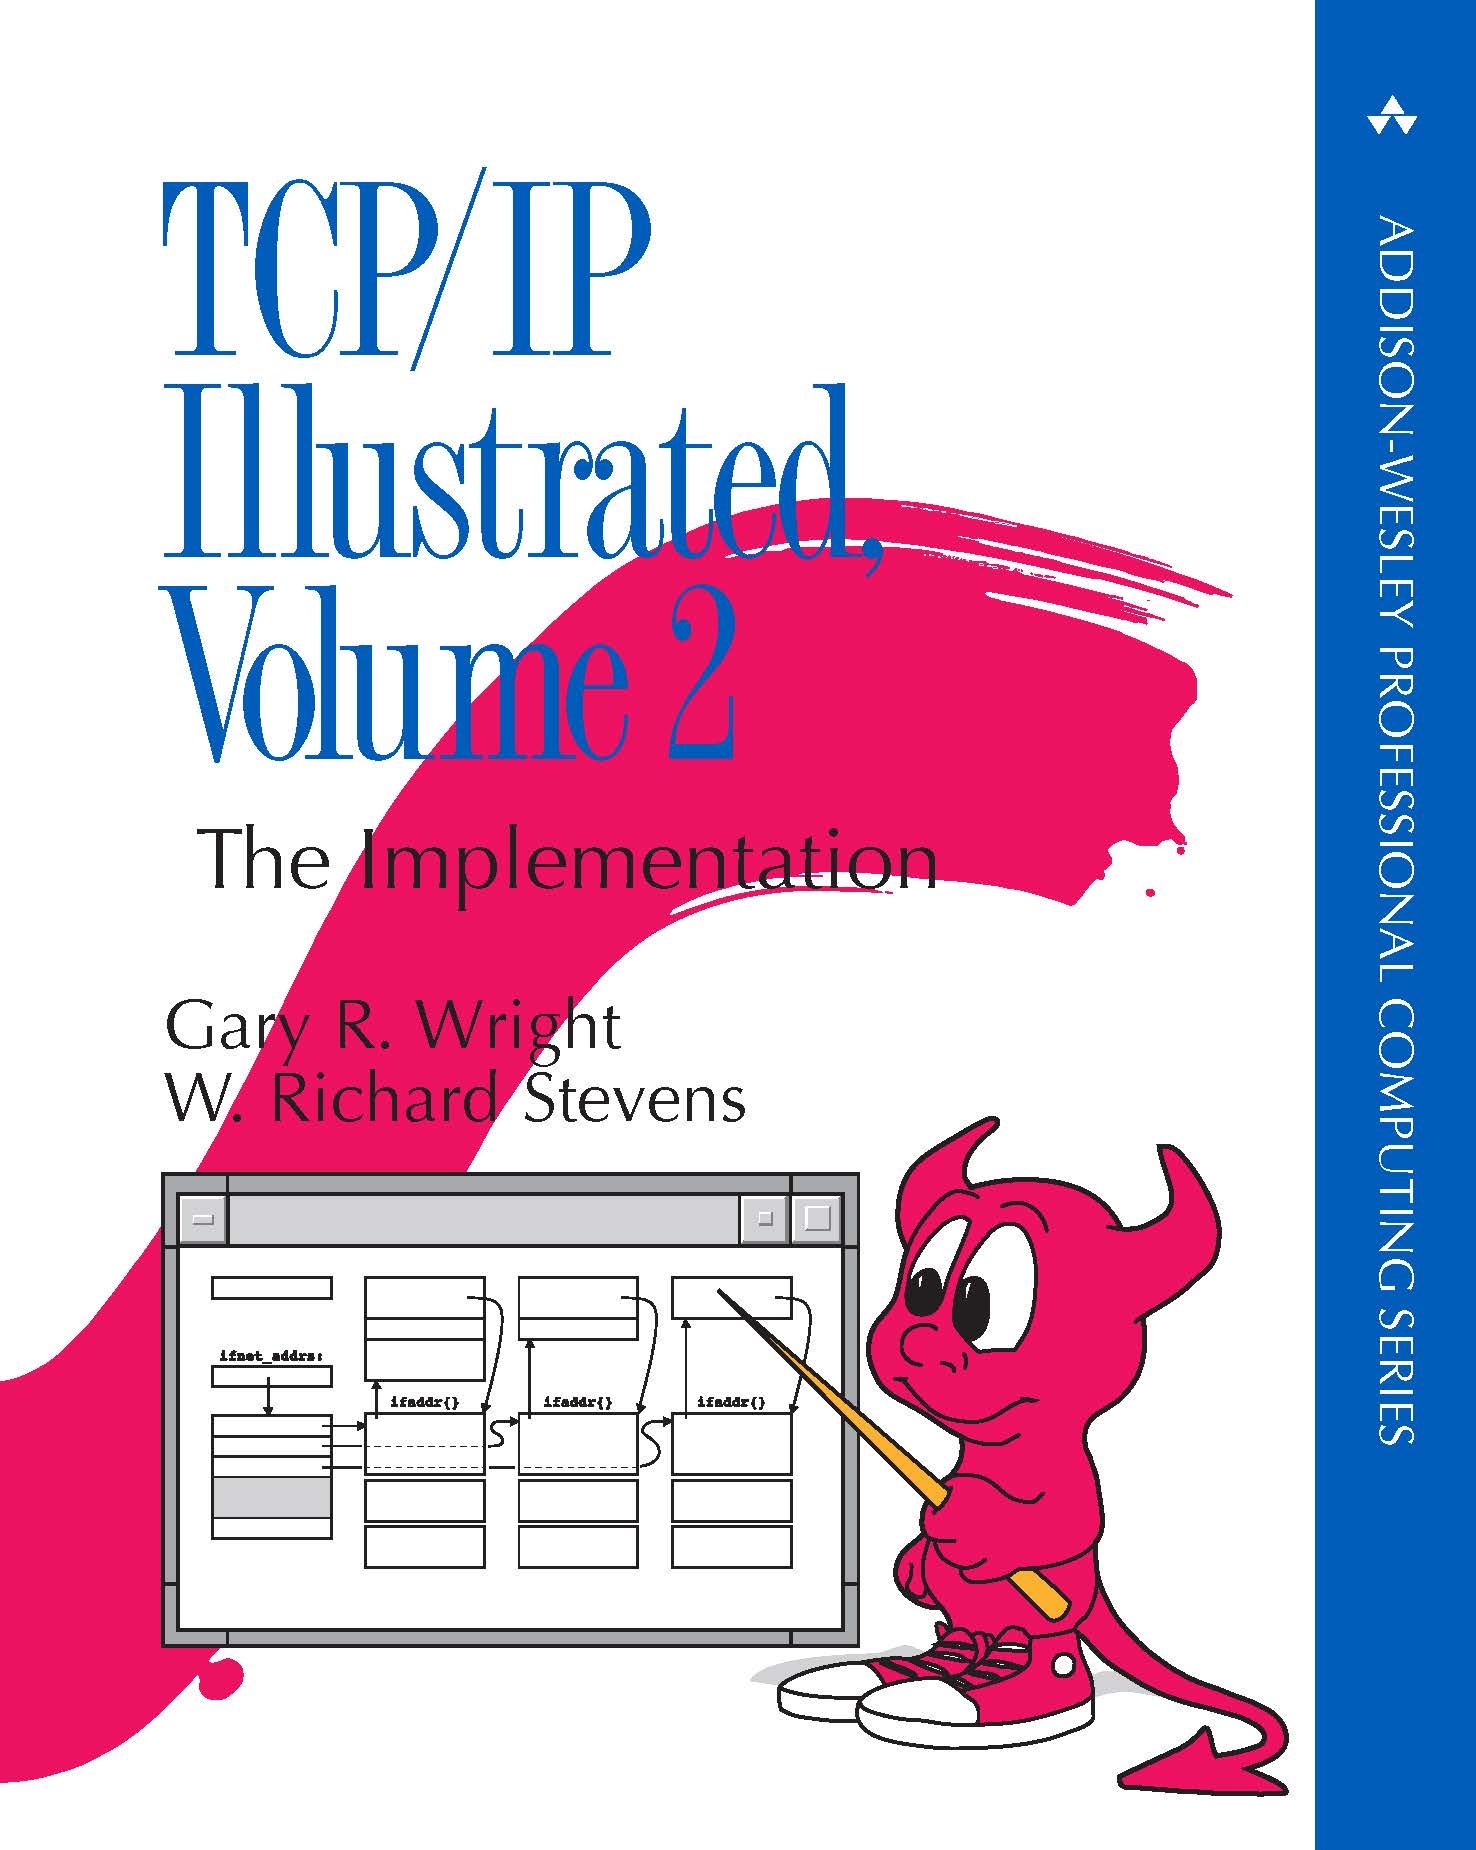 tcp ip illustrated volume 2 the implementation pdf free download